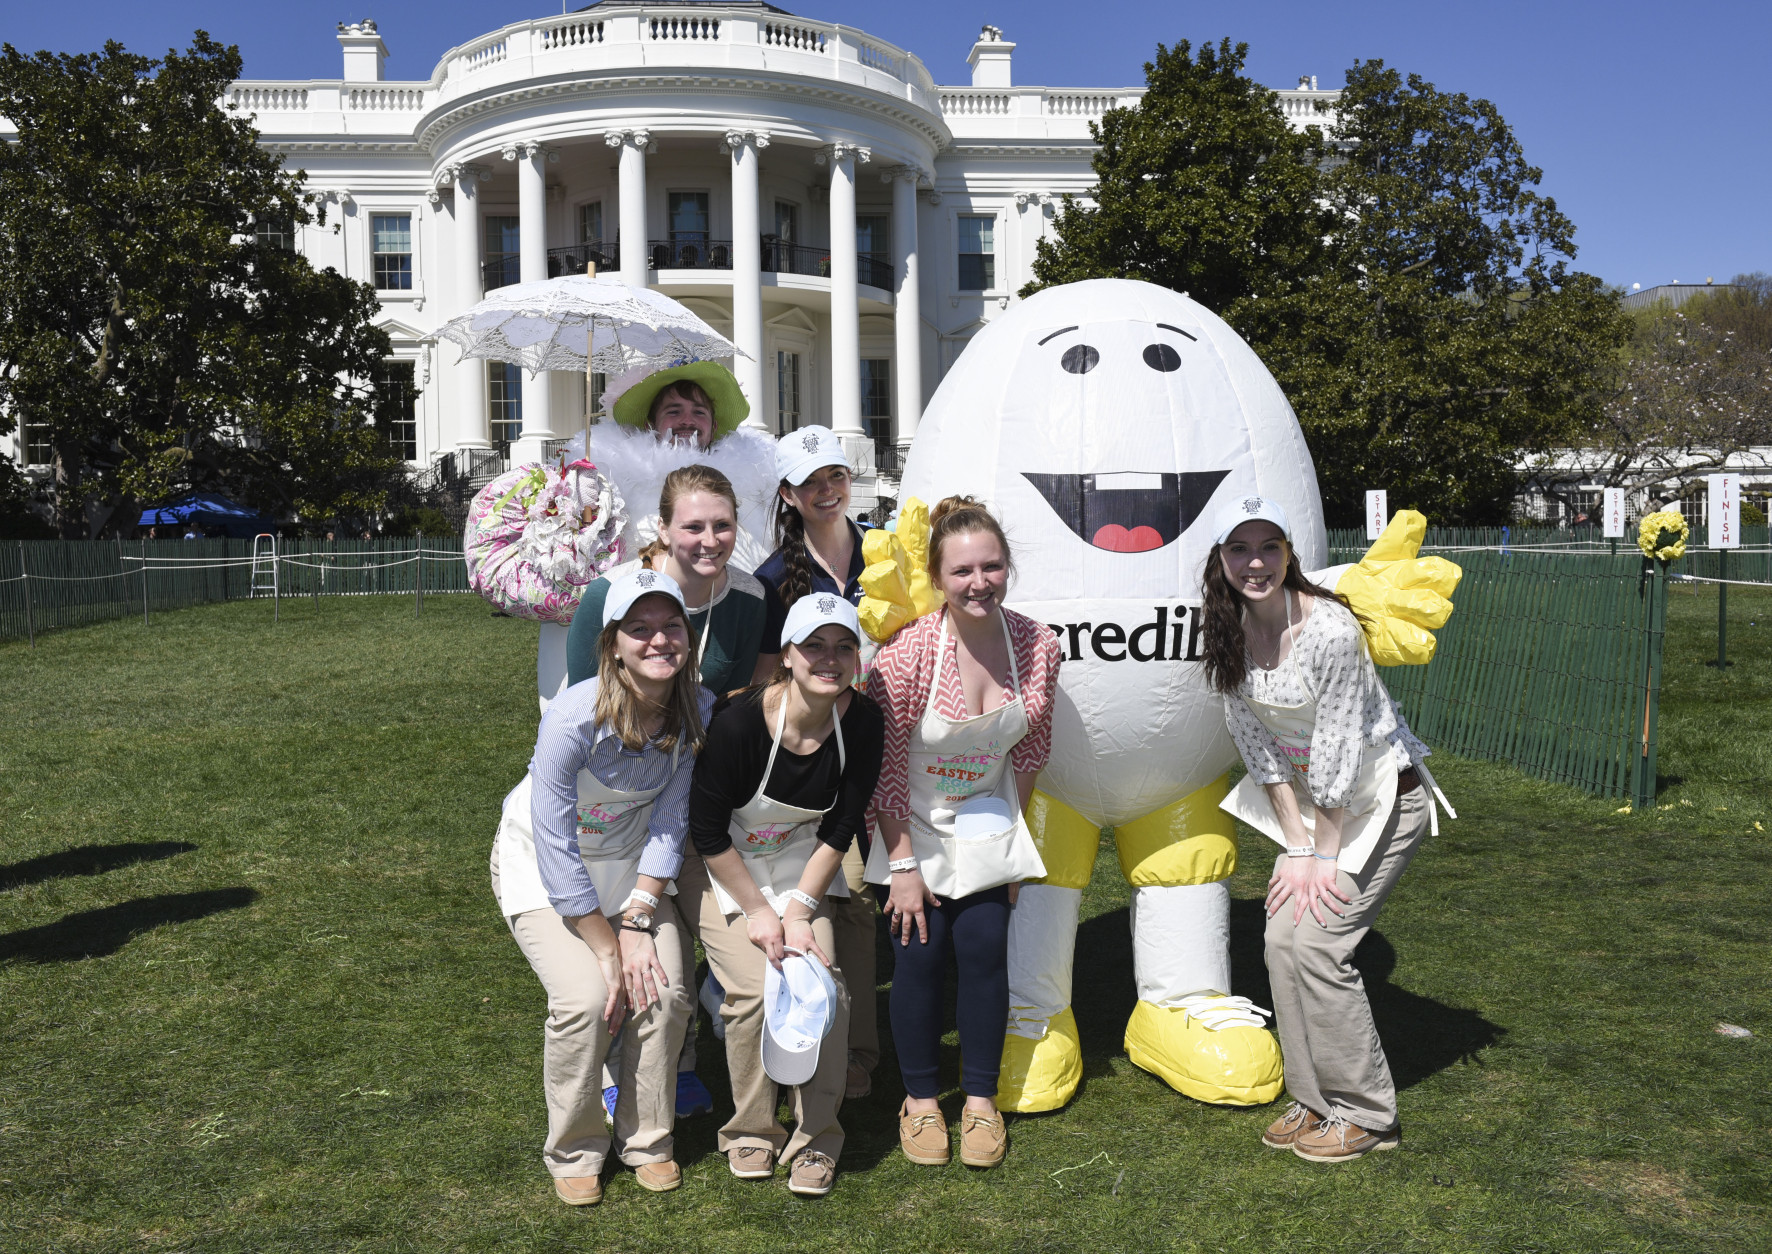 AEB "Abe" The American Egg Board mascot, right, poses with volunteers at the White House Easter Egg Roll festivities on the White House South Lawn in Washington, Monday, March 28, 2016. (Kevin Wolf/AP Images for American Egg Board)